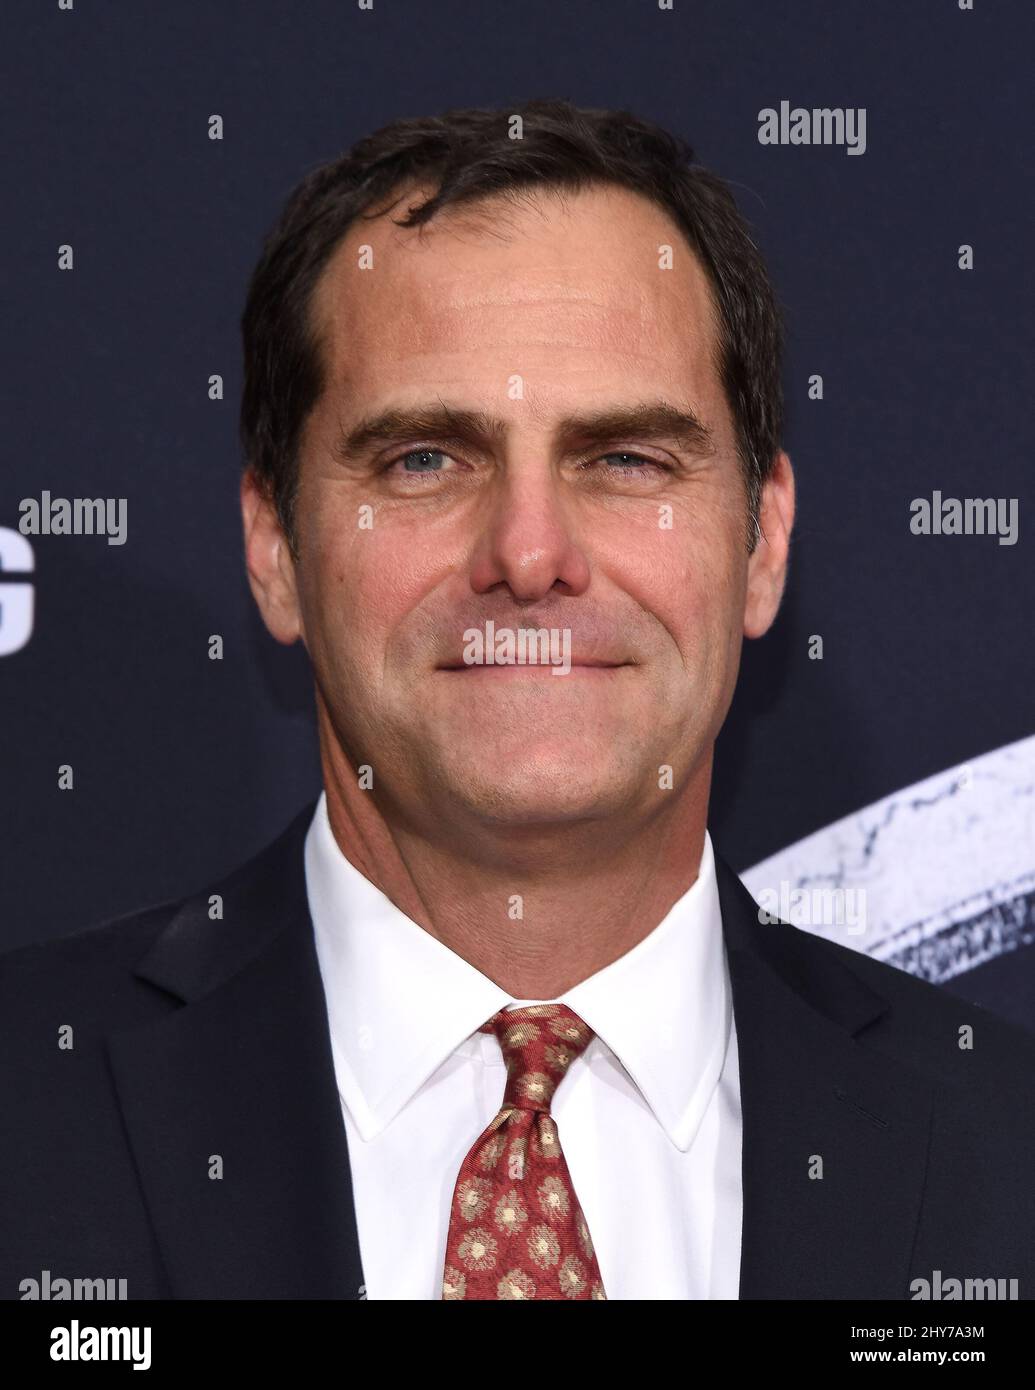 Andy Buckley attending the "Jurassic World" World Premiere held at the Dolby Theatre in Los Angeles, California. Stock Photo